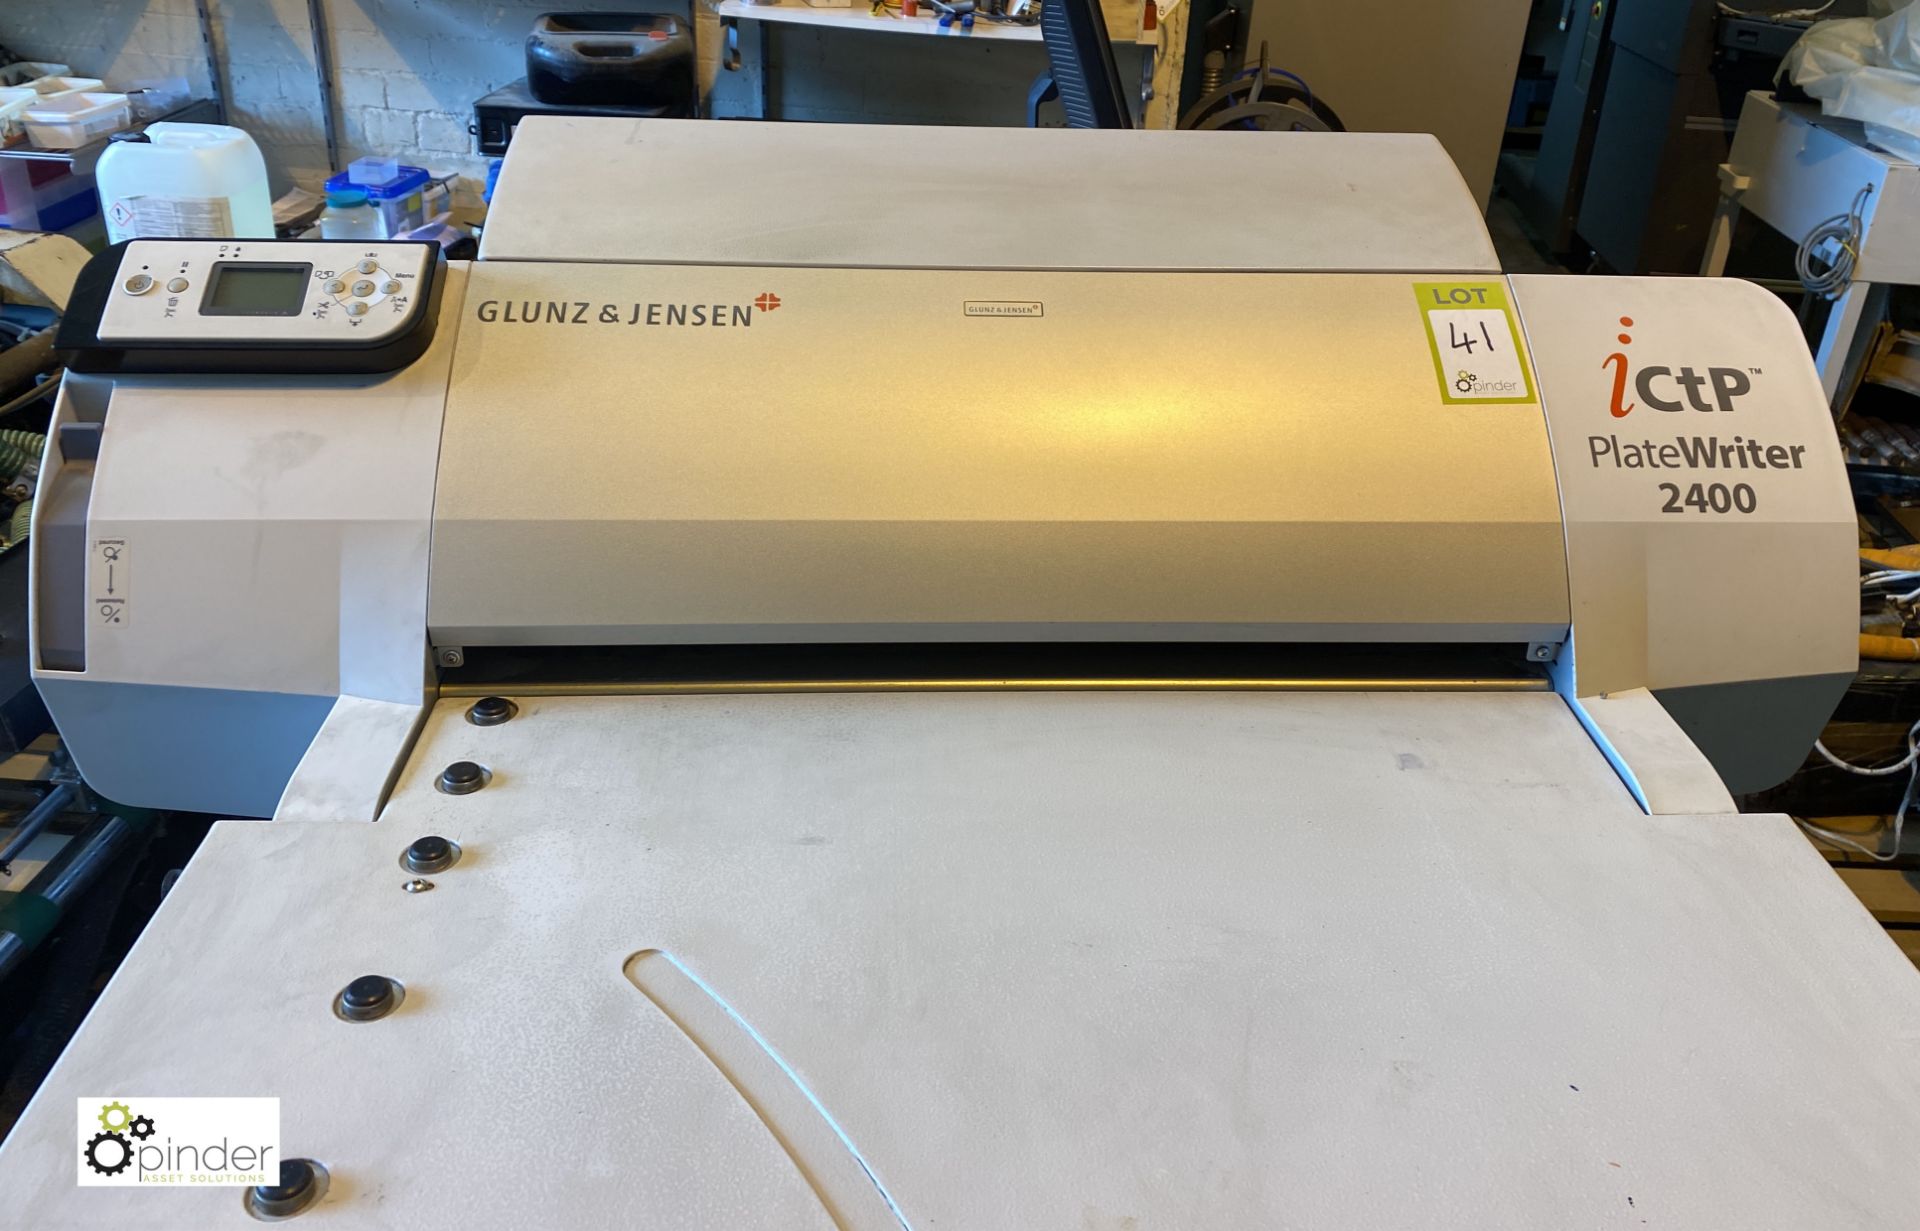 Glunz & Jensen iCtp Plate Writer 2400, with ink spares, etc (please note there is a lift out fee - Image 4 of 9